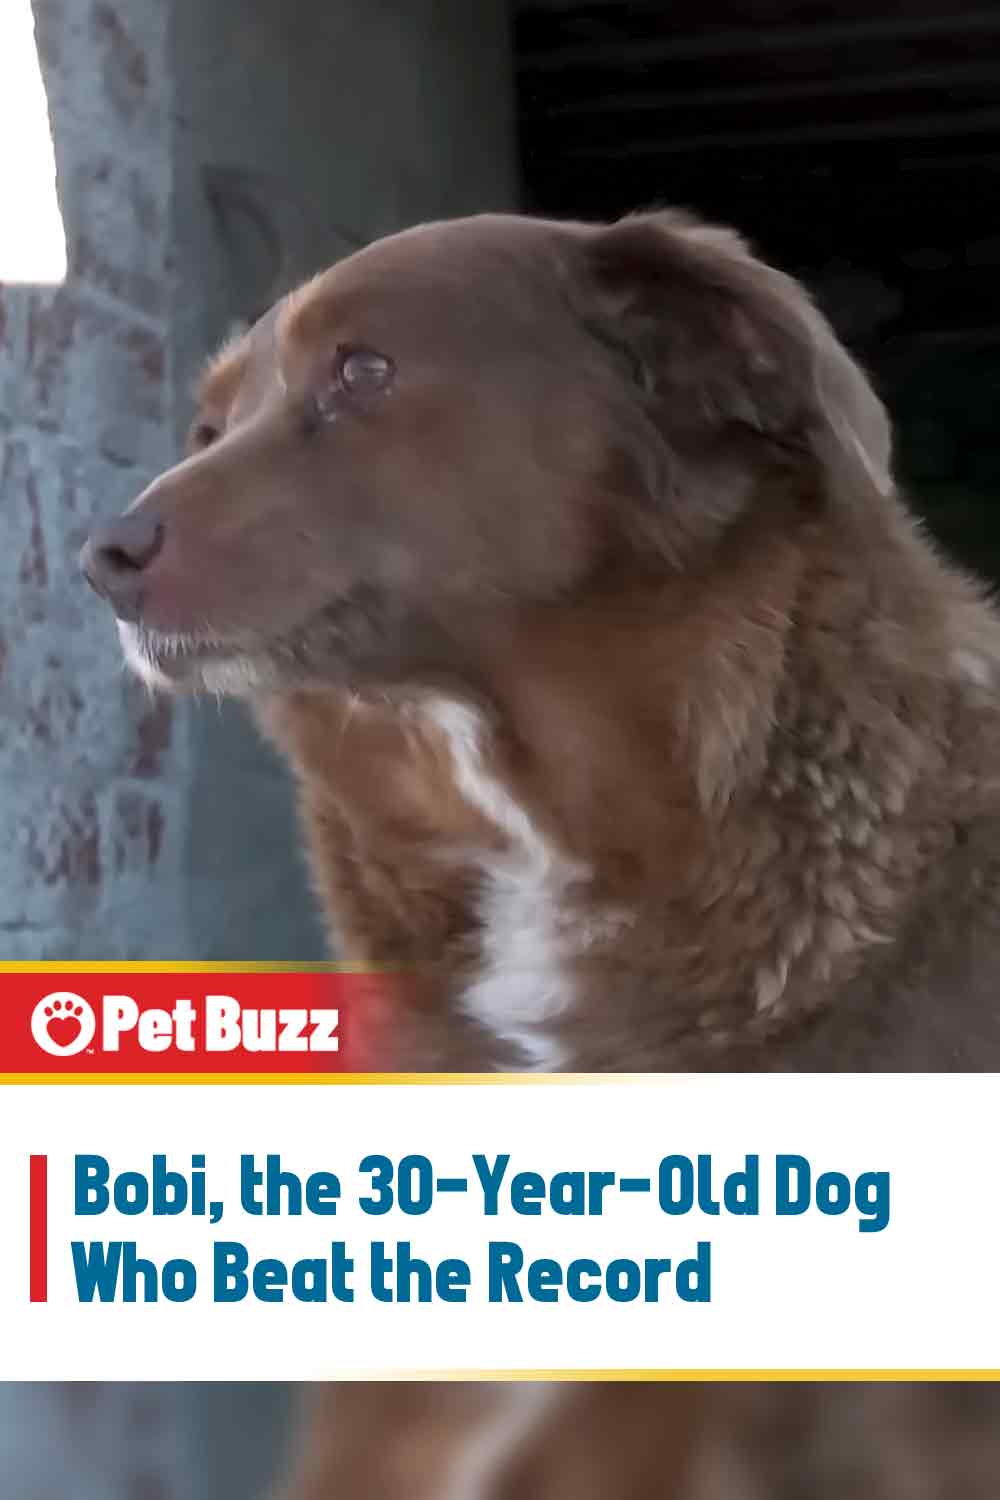 Bobi, the 30-Year-Old Dog Who Beat the Record